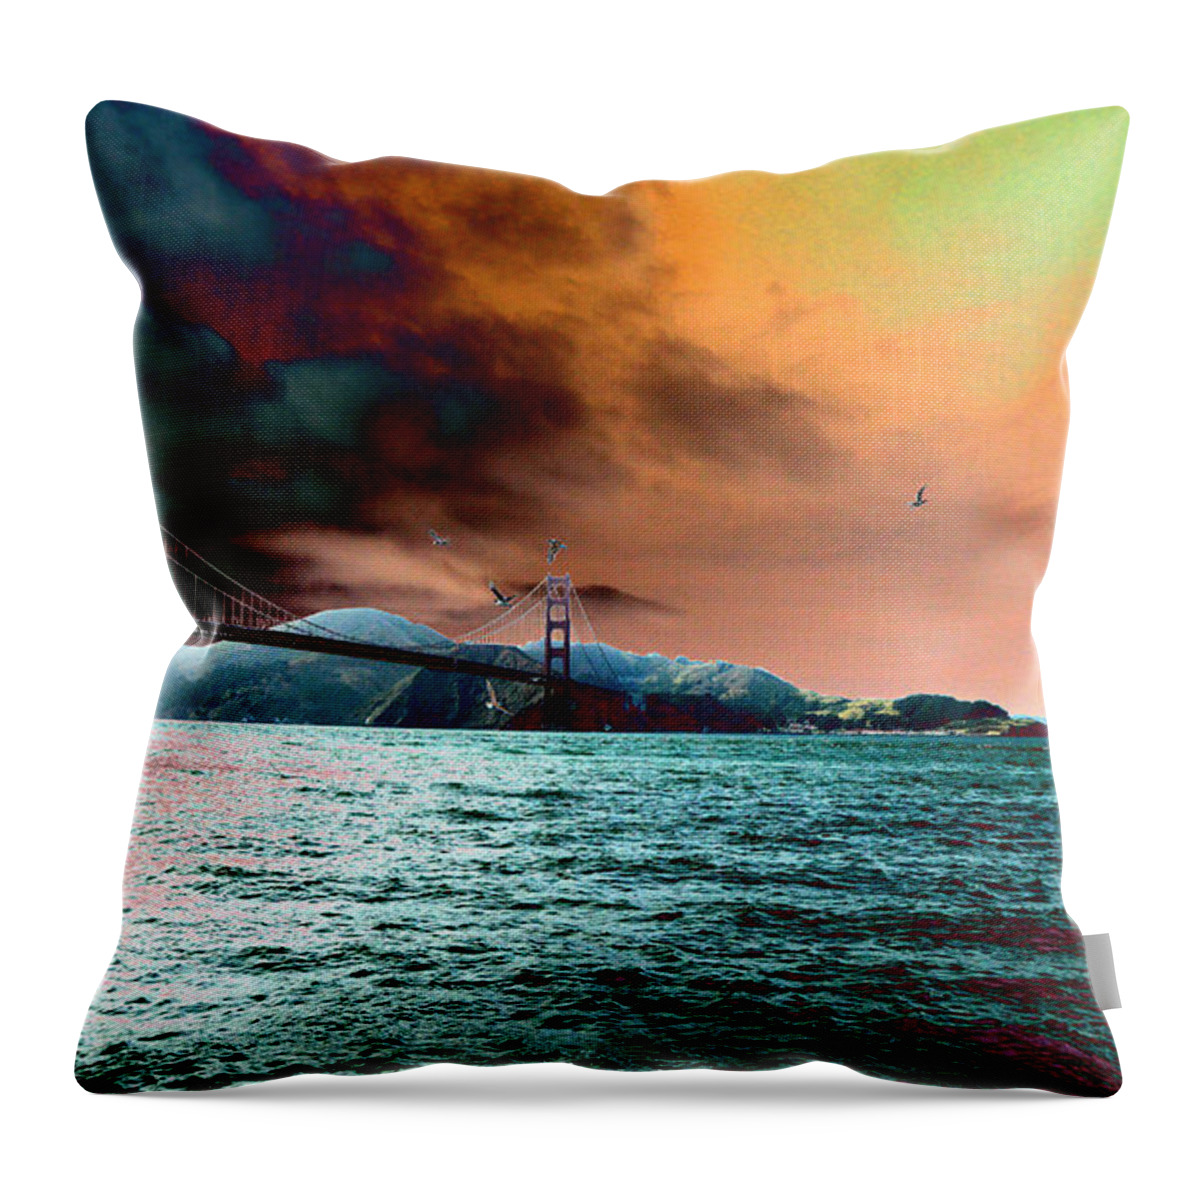 Bridge Throw Pillow featuring the photograph Freedom by Tom Kelly